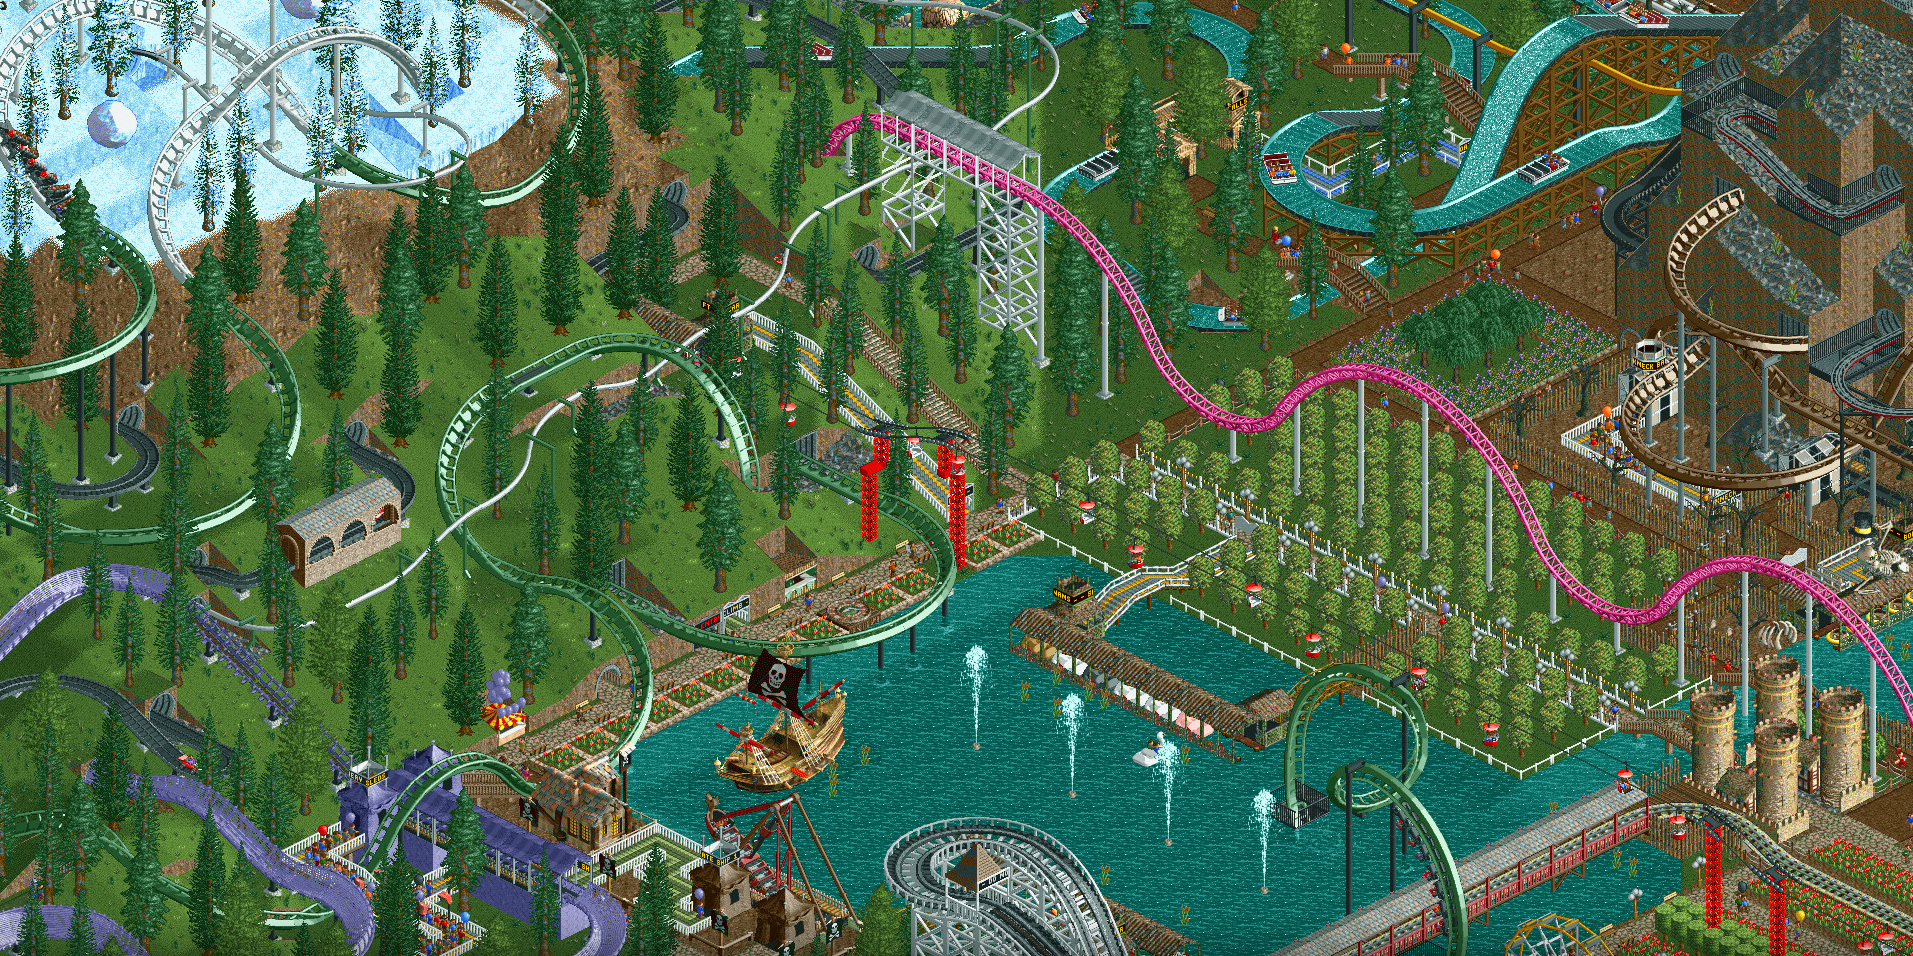  Randomizer mod for RollerCoaster Tycoon breathes life into a bonafide classic 